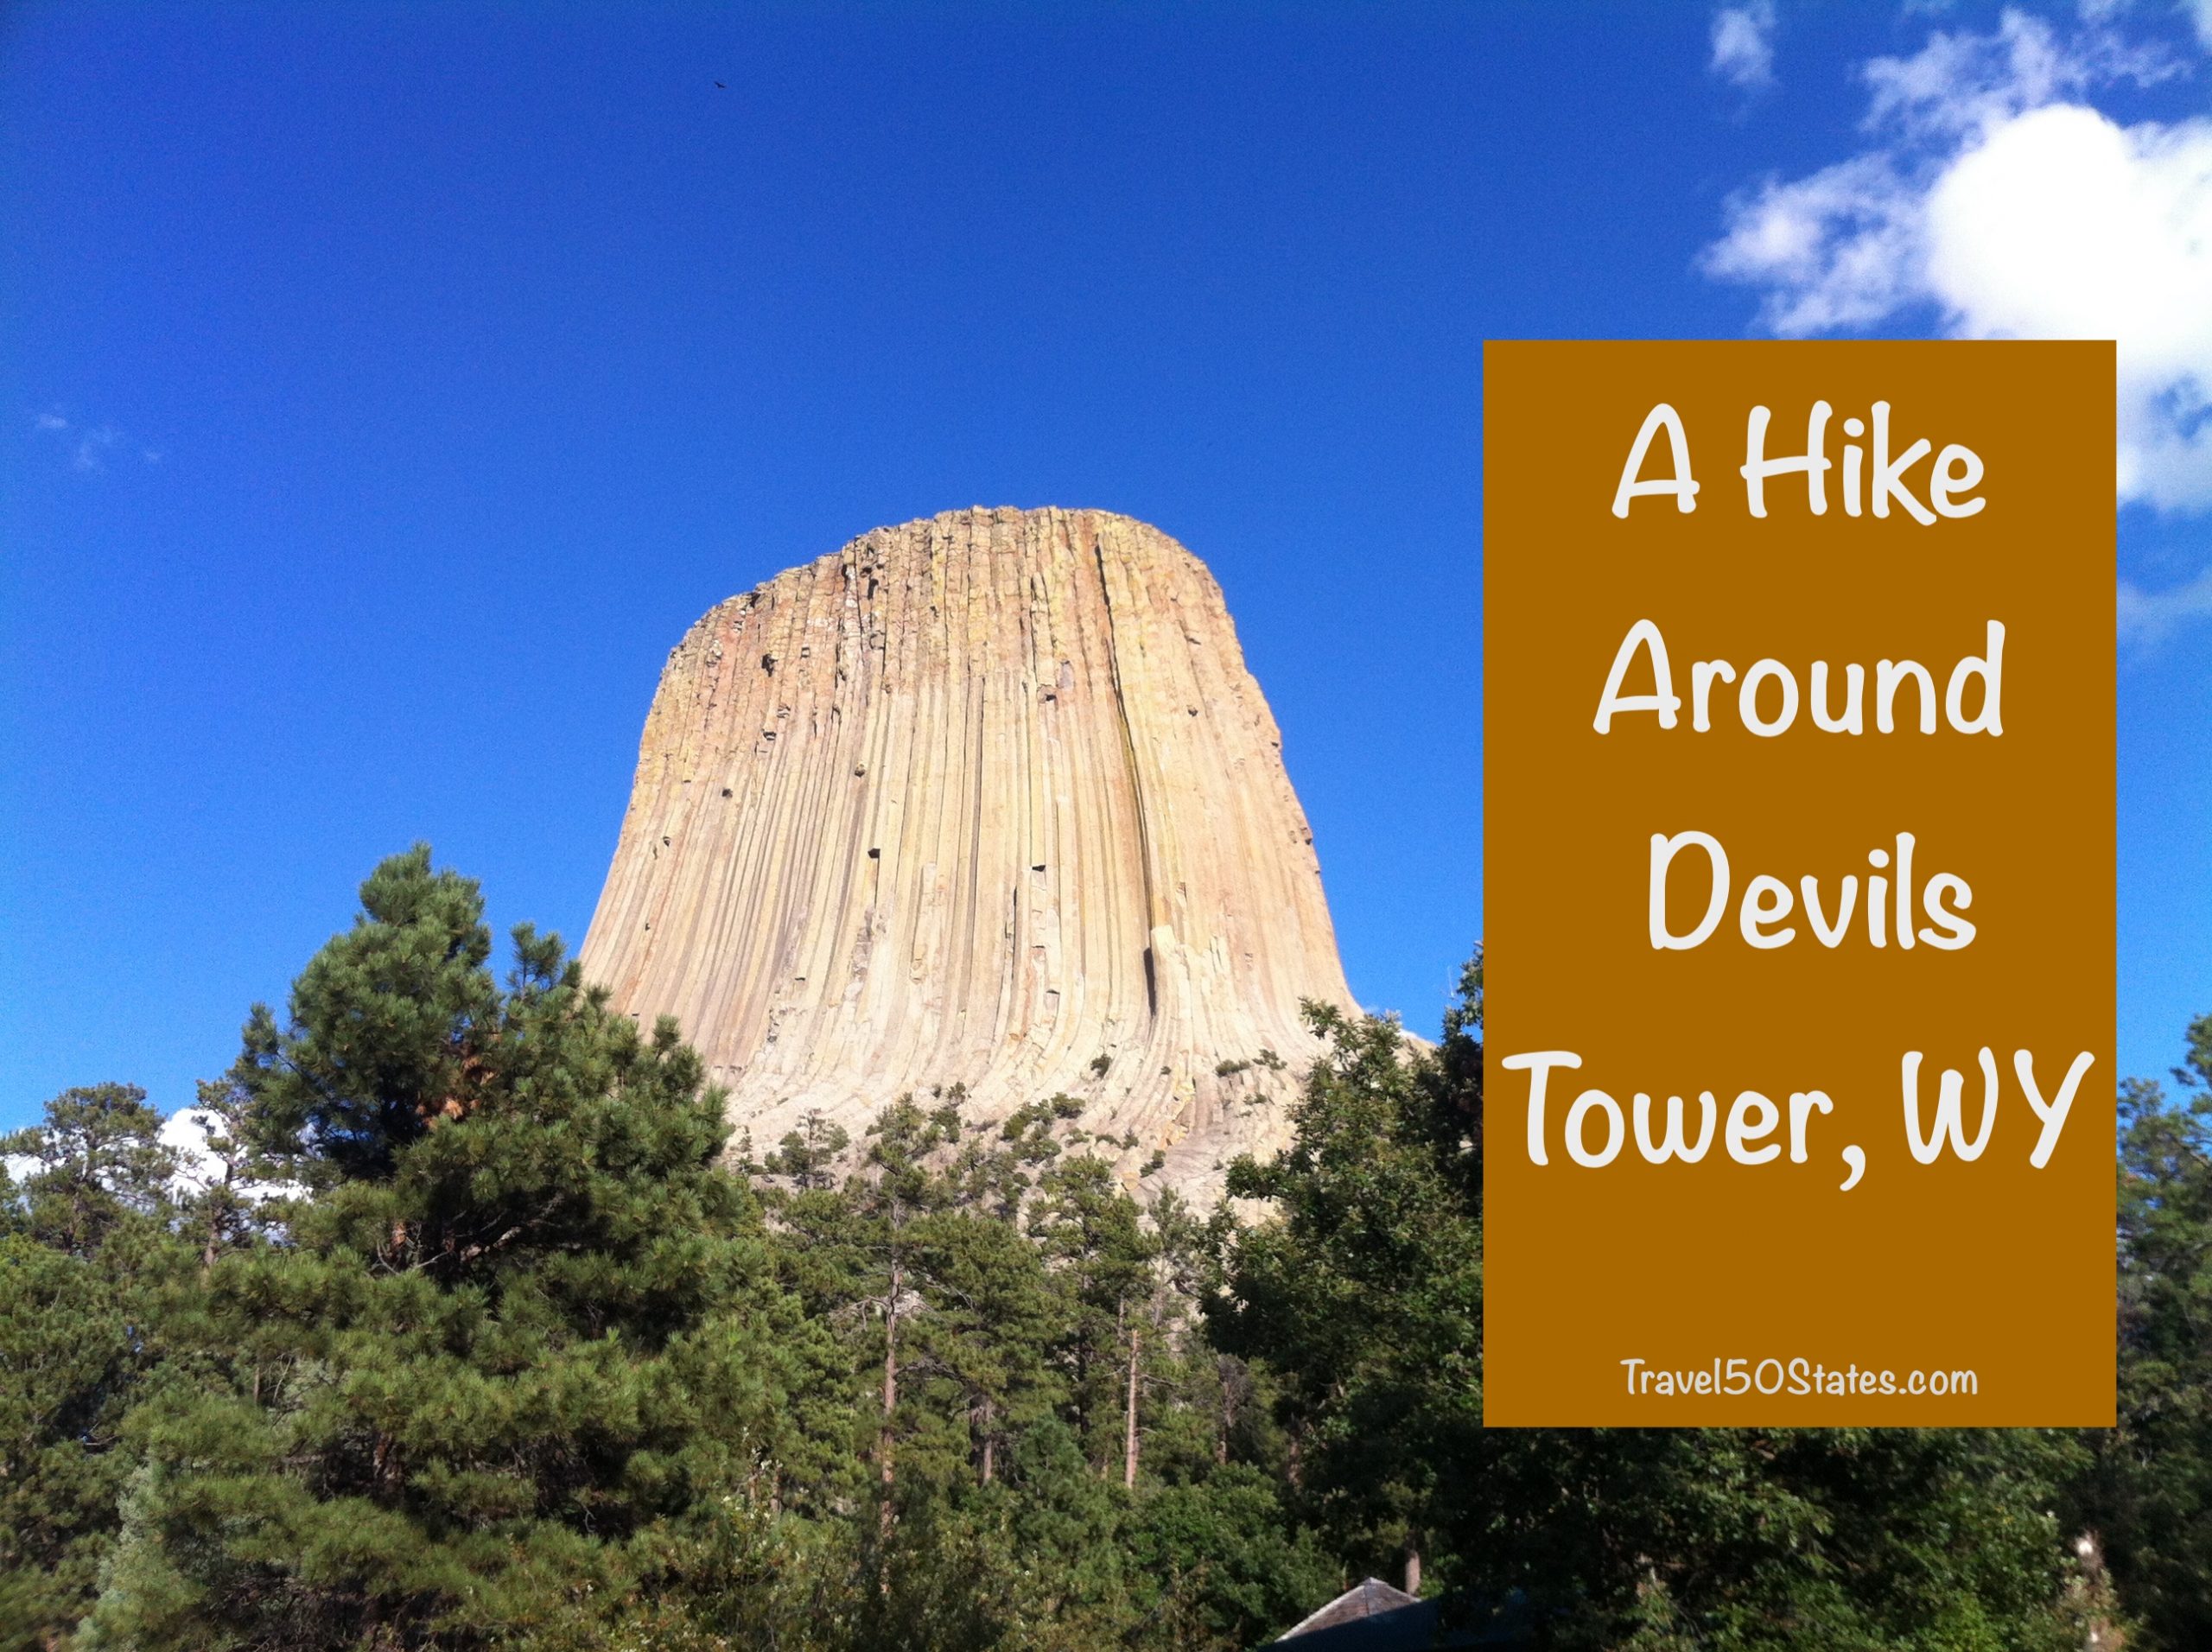 A Hike Around Devils Tower, Wyoming